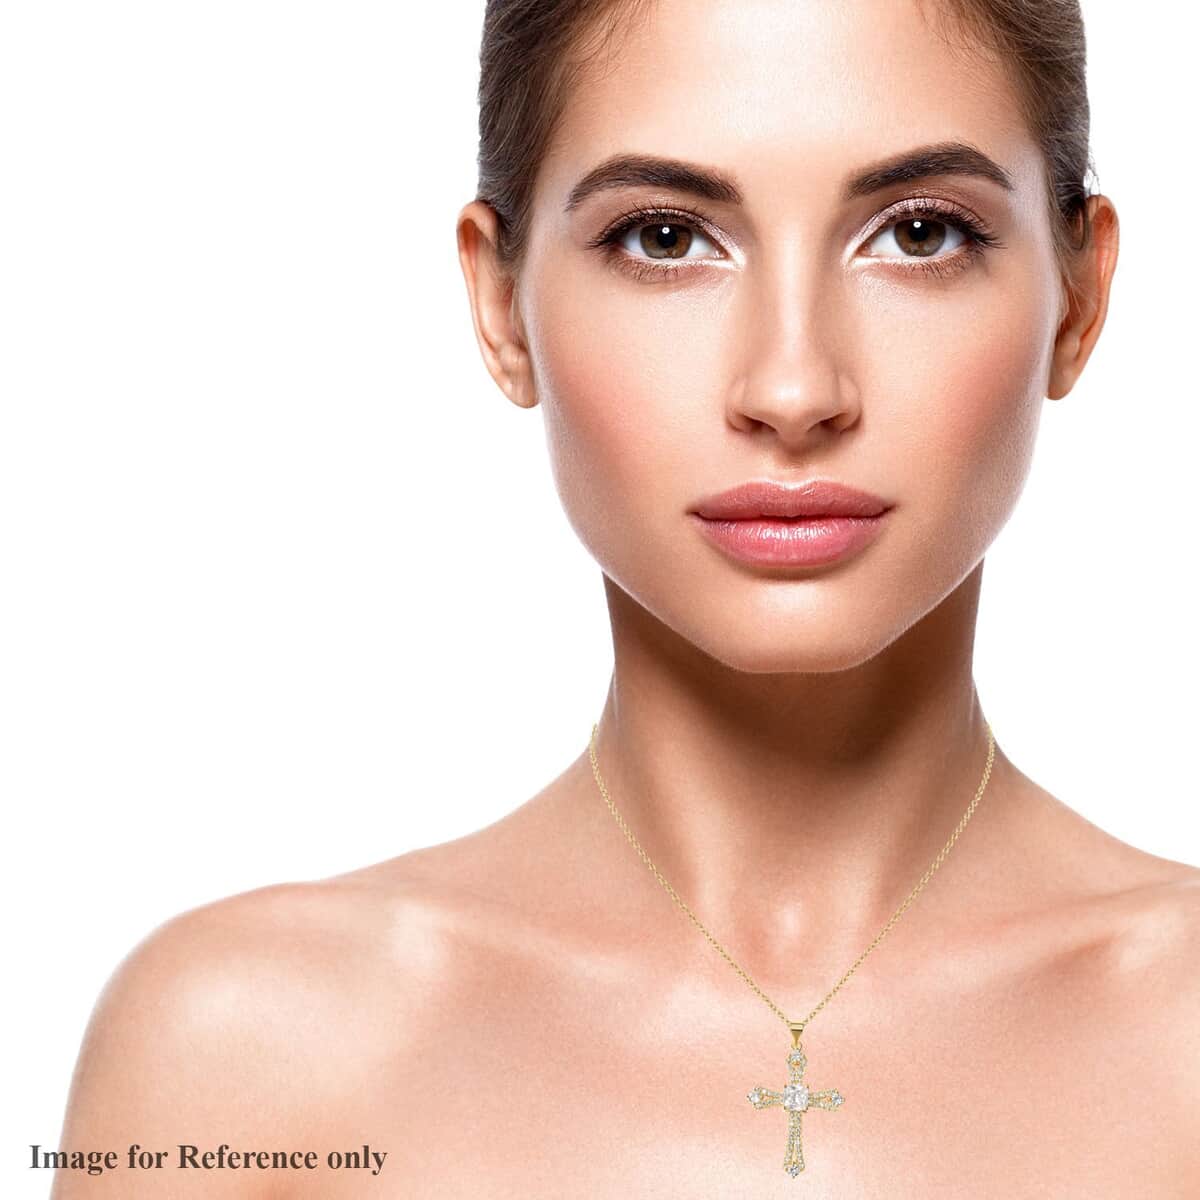 Simulated Diamond Cross Pendant in Goldtone with ION Plated YG Stainless Steel Necklace 20 Inches image number 2